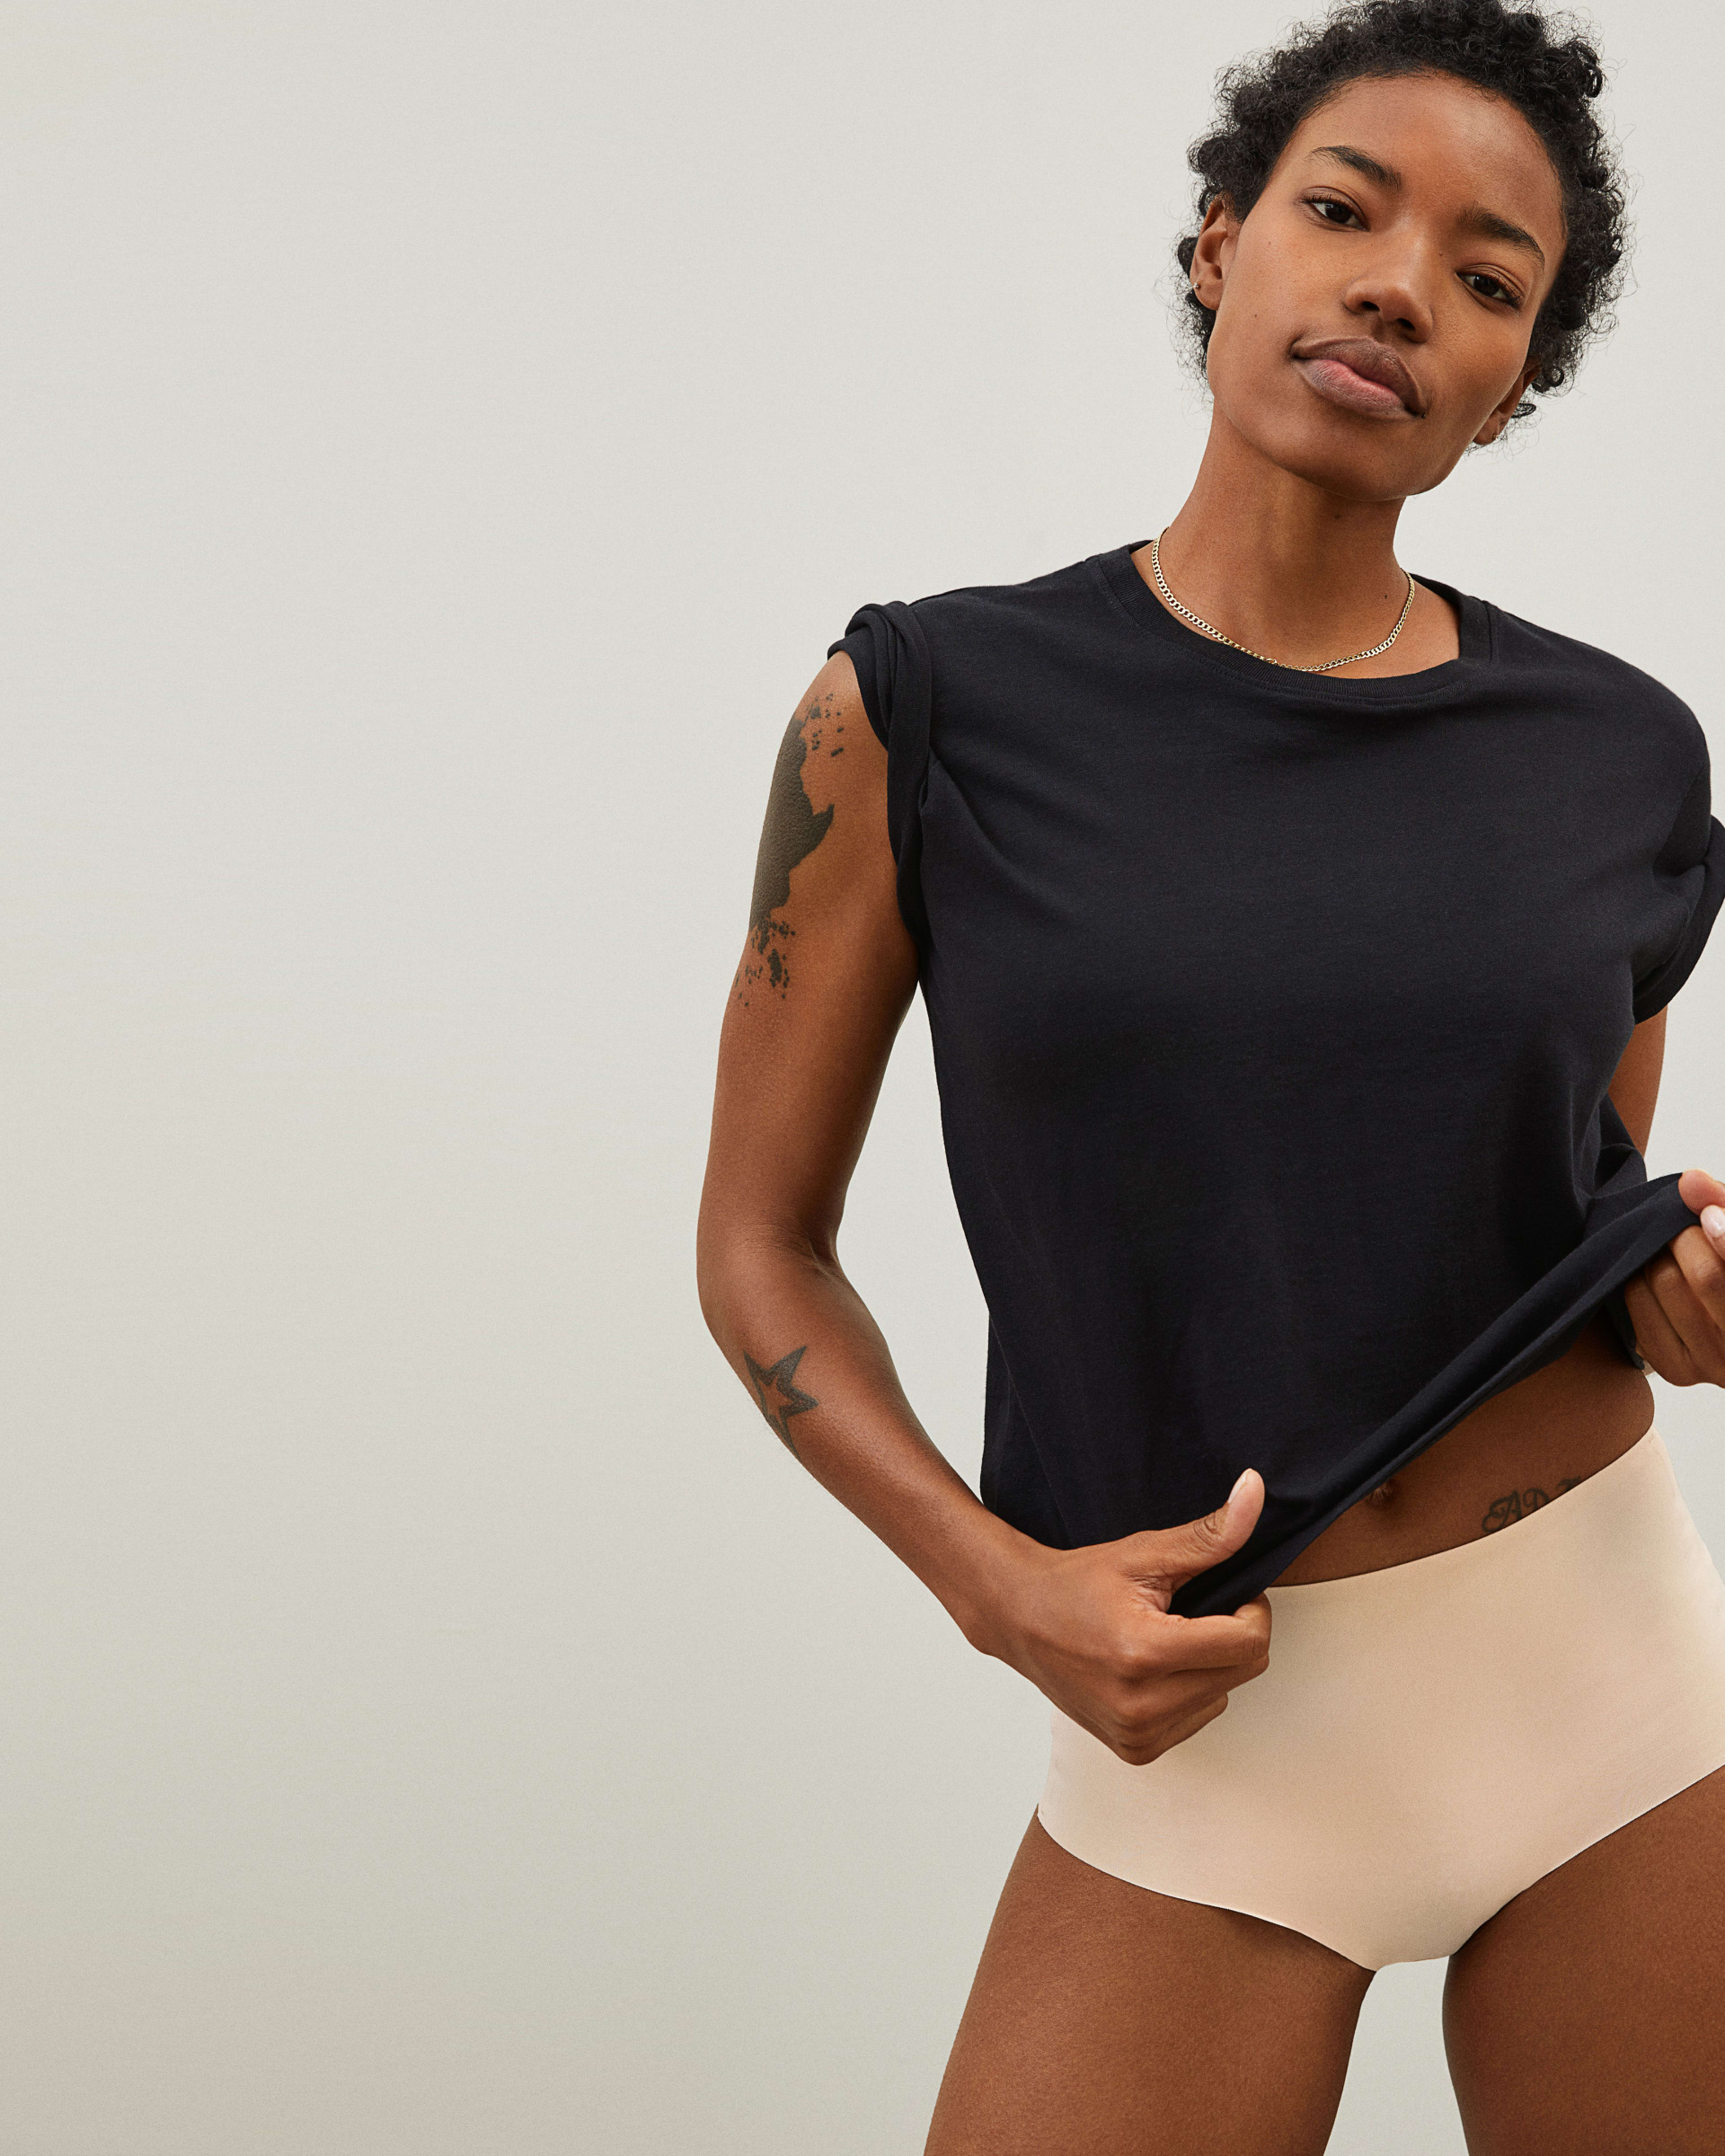 The High-Waisted Panty is Back (and More Sustainable Than Ever